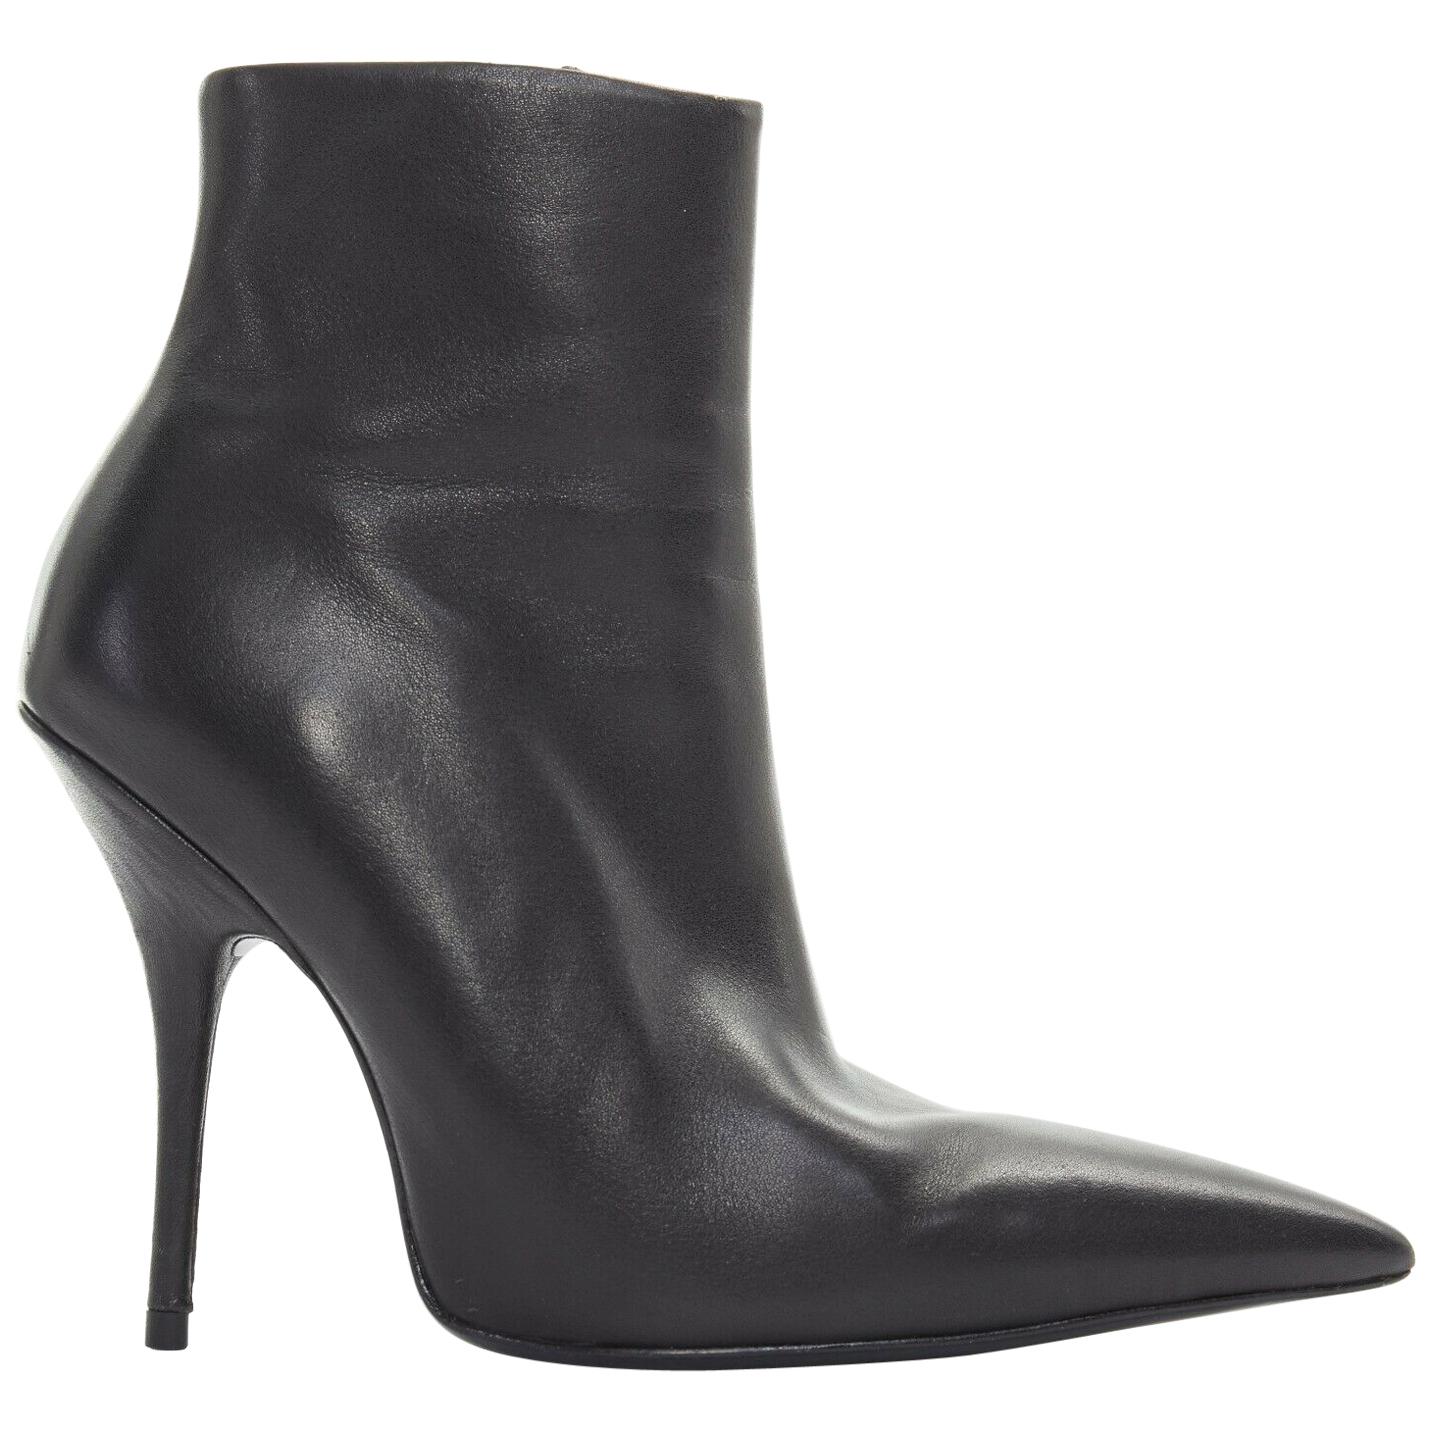 BALENCIAGA black leather Knife pointed toe sculpted slim heel ankle bootie EU35